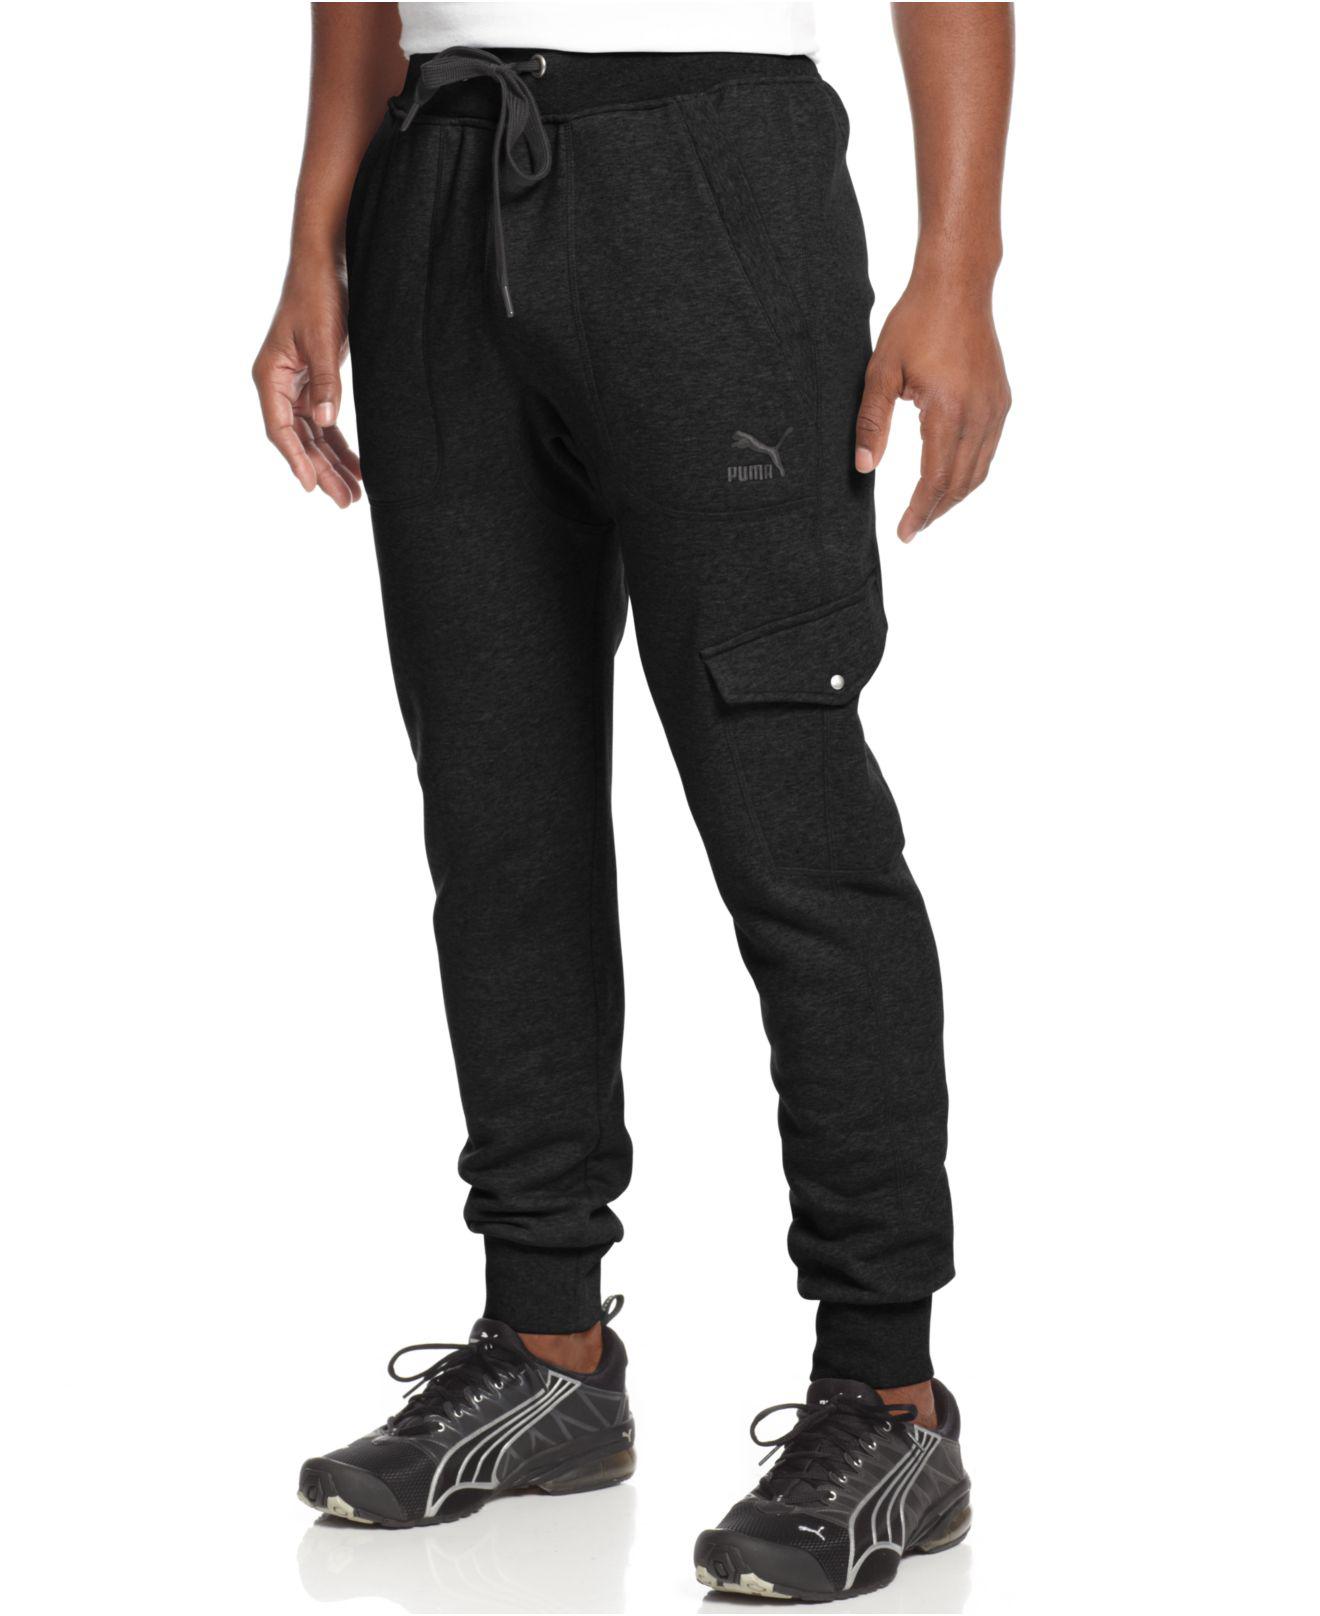 PUMA Cotton Knit Cargo Jogger Pants in Black for Men - Lyst